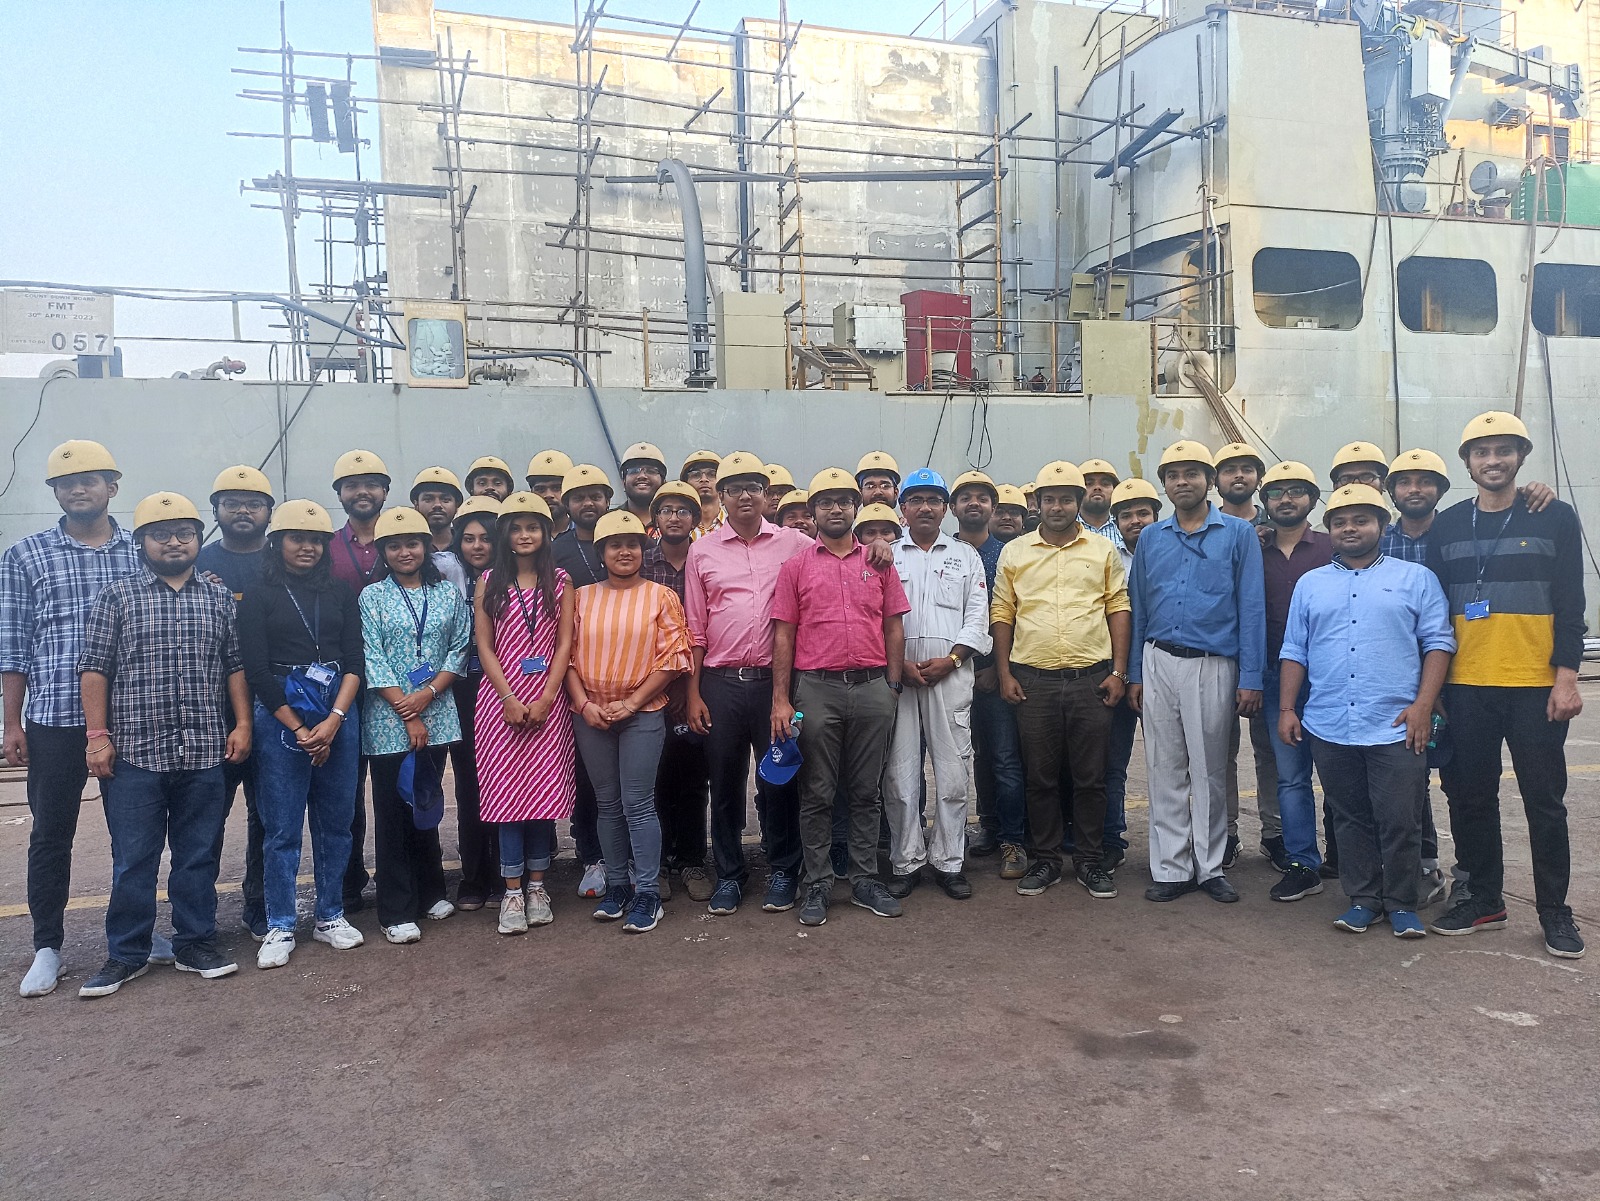 Image 1 - Educational Visit of M.Tech students from NIT Durgapur on 06 Mar 23